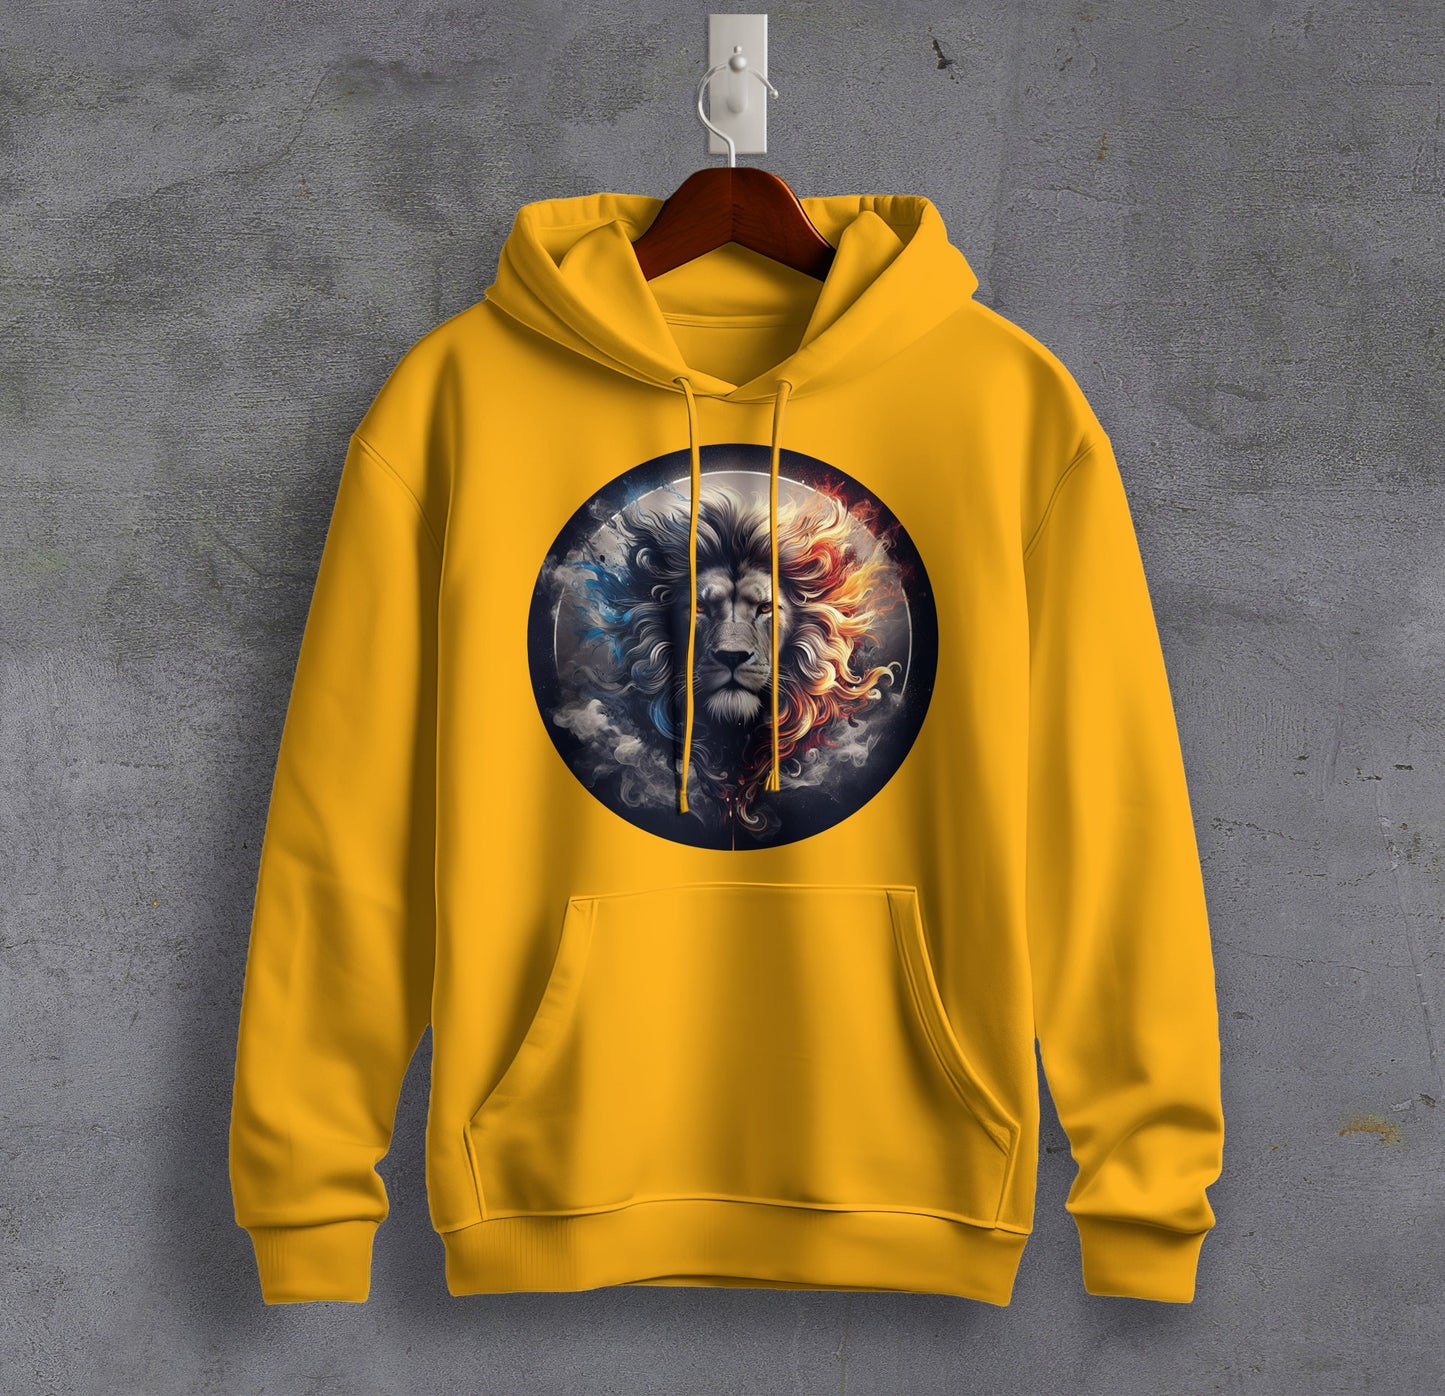 Majestic Lion - Graphic Printed Hooded Sweat Shirt for Men - Cotton - Magnificence of India Sweat Shirt